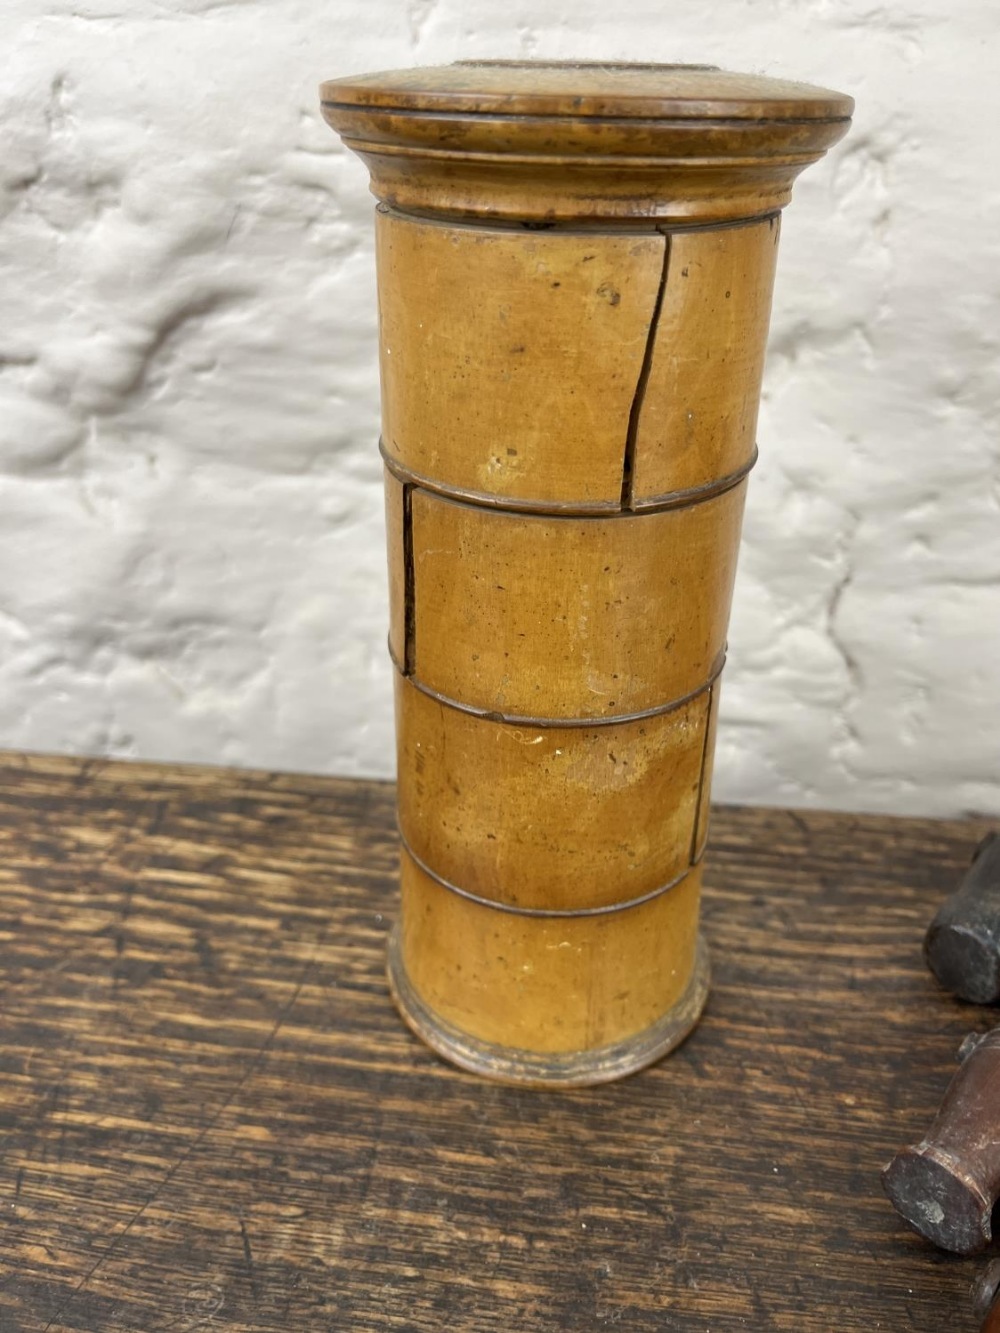 C19th treen spice tower, four tiers with paper labels for Cloves, Mace, Ginger and Nutmegs, H20cm, - Image 3 of 3